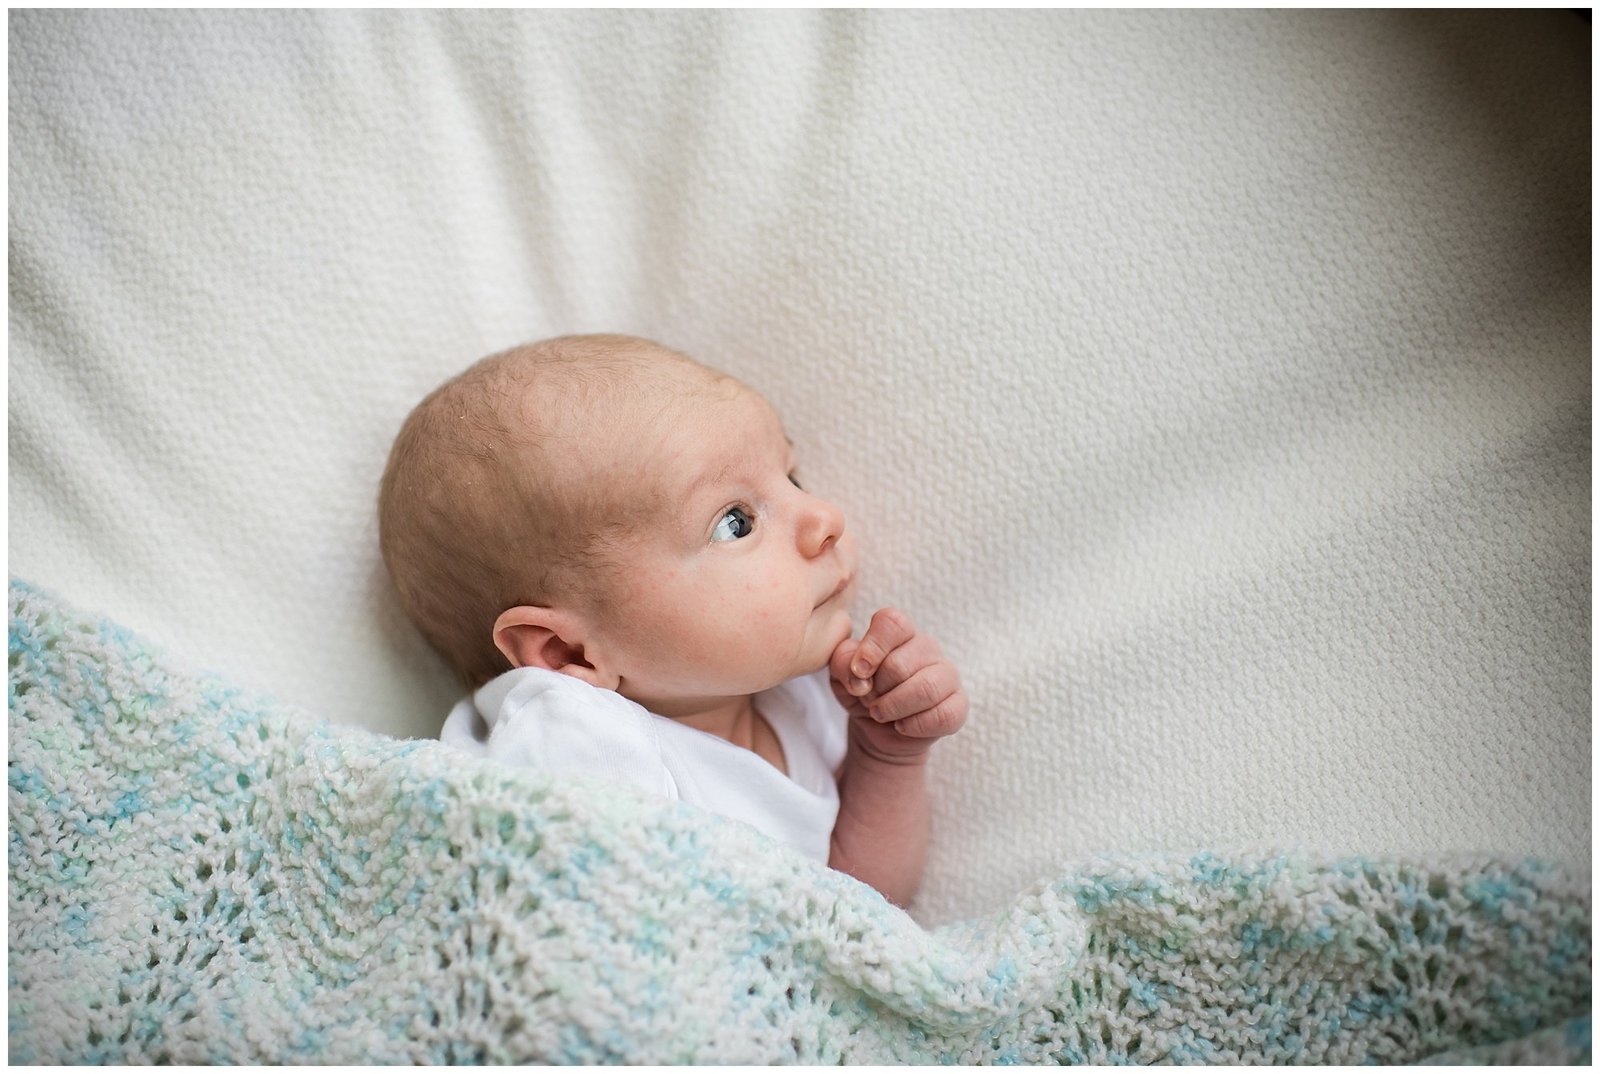 Newborn baby boy with special crochet blanket Emily Ann Photography Seattle Photographer